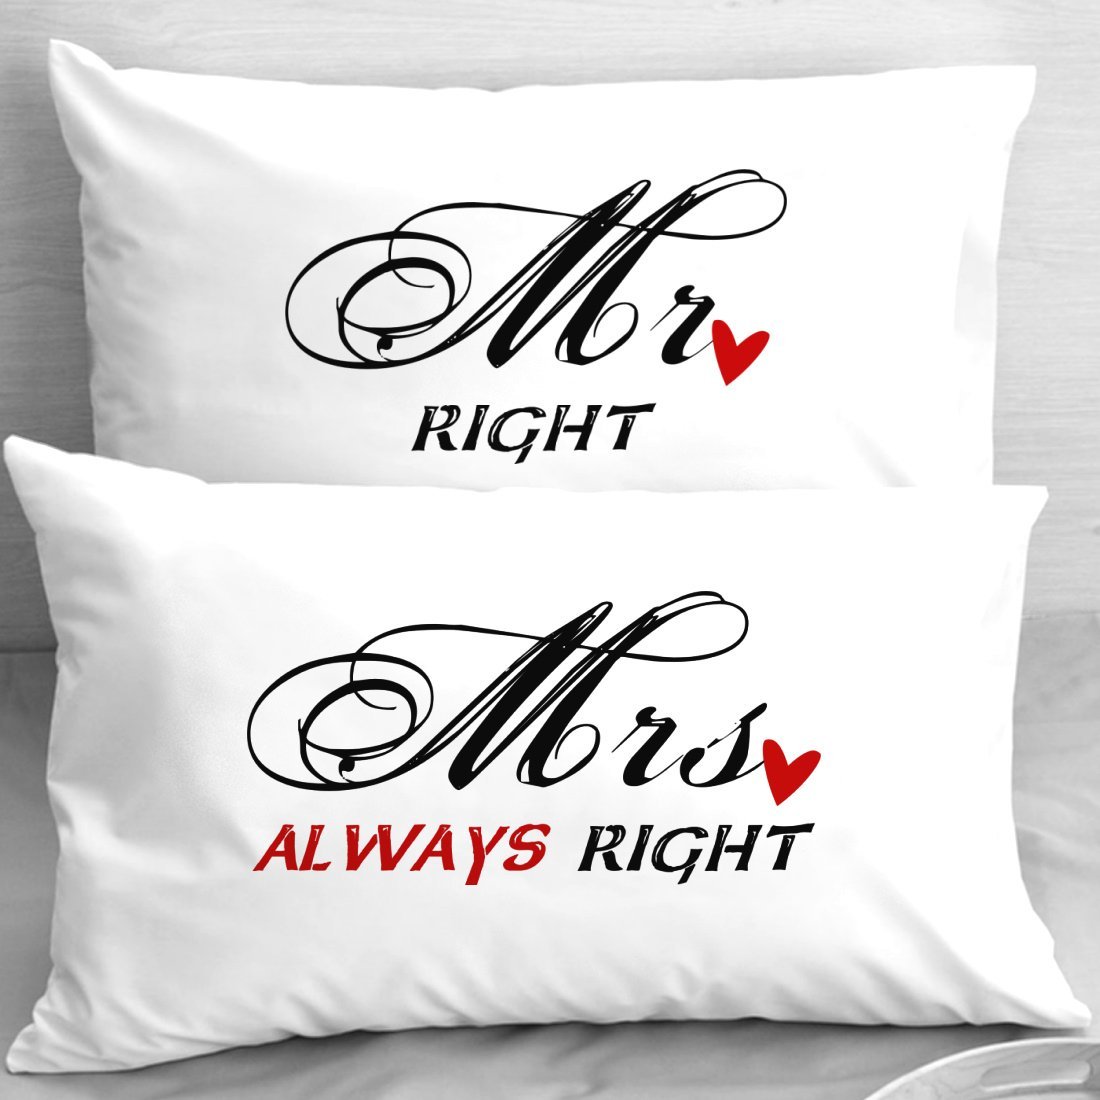 Подушки с вышивкой Mr and Mrs. Mrs always right. Патрики Mr right. You re always right